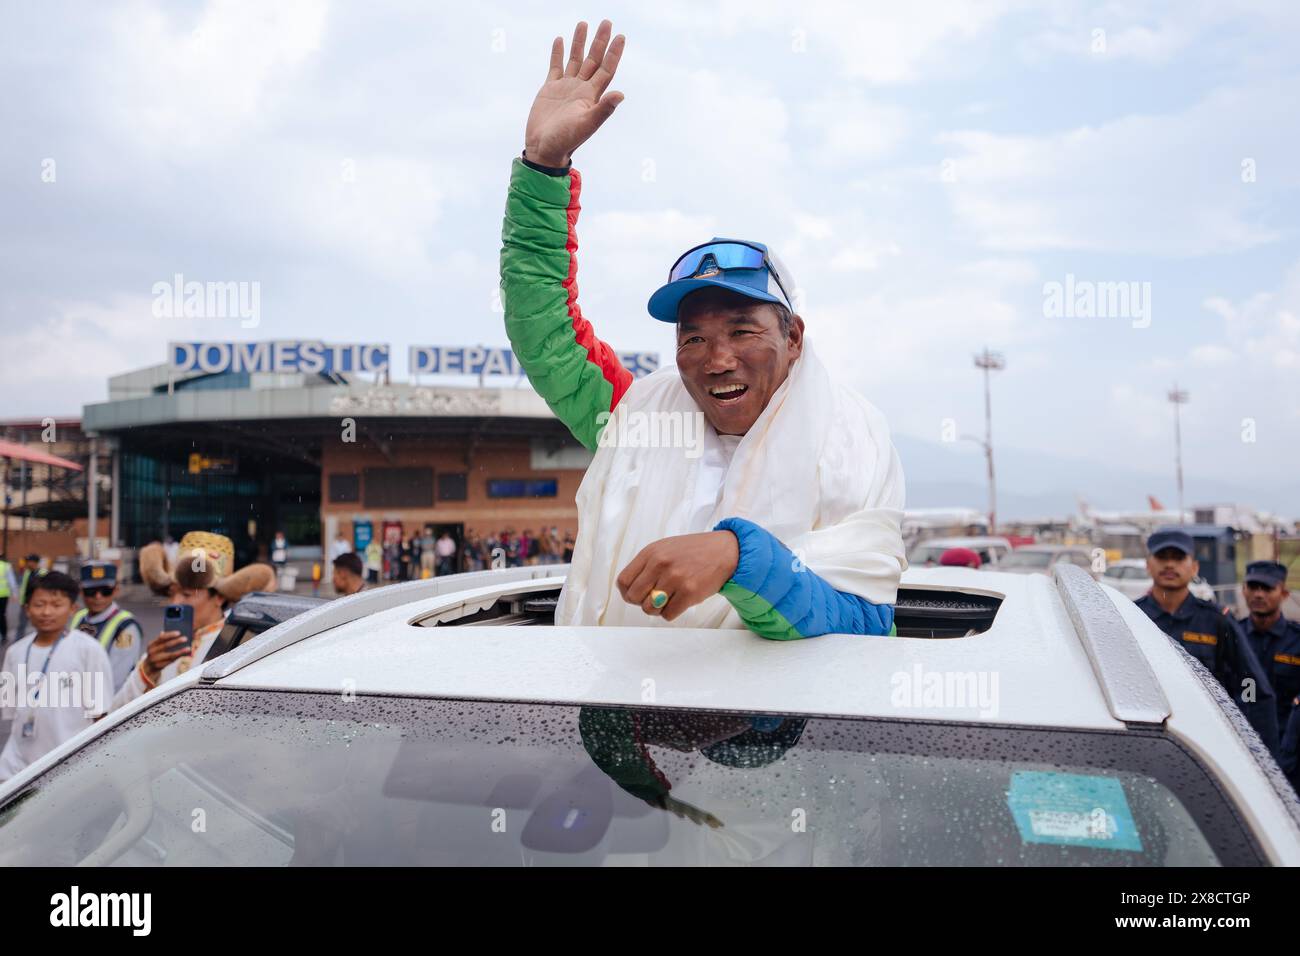 Kathmandu, Nepal. 24th May, 2024. Legendary Mountaineer Kami Rita Sherpa waves at people as he arrives after scaling Mt Everest for the 30th time, leading the world record of most ascents on the world's highest peak Mount Everest at Tribhuvan International Airport. Kami Rita Sherpa, considered one of the greatest mountain guides, reached the 8,849-meter (29,032-foot) summit at 7:49 AM local time on Wednesday 22 May, 2024 according to expedition organizer Seven Summits Treks. (Photo by Prabin Ranabhat/SOPA Images/Sipa USA) Credit: Sipa USA/Alamy Live News Stock Photo